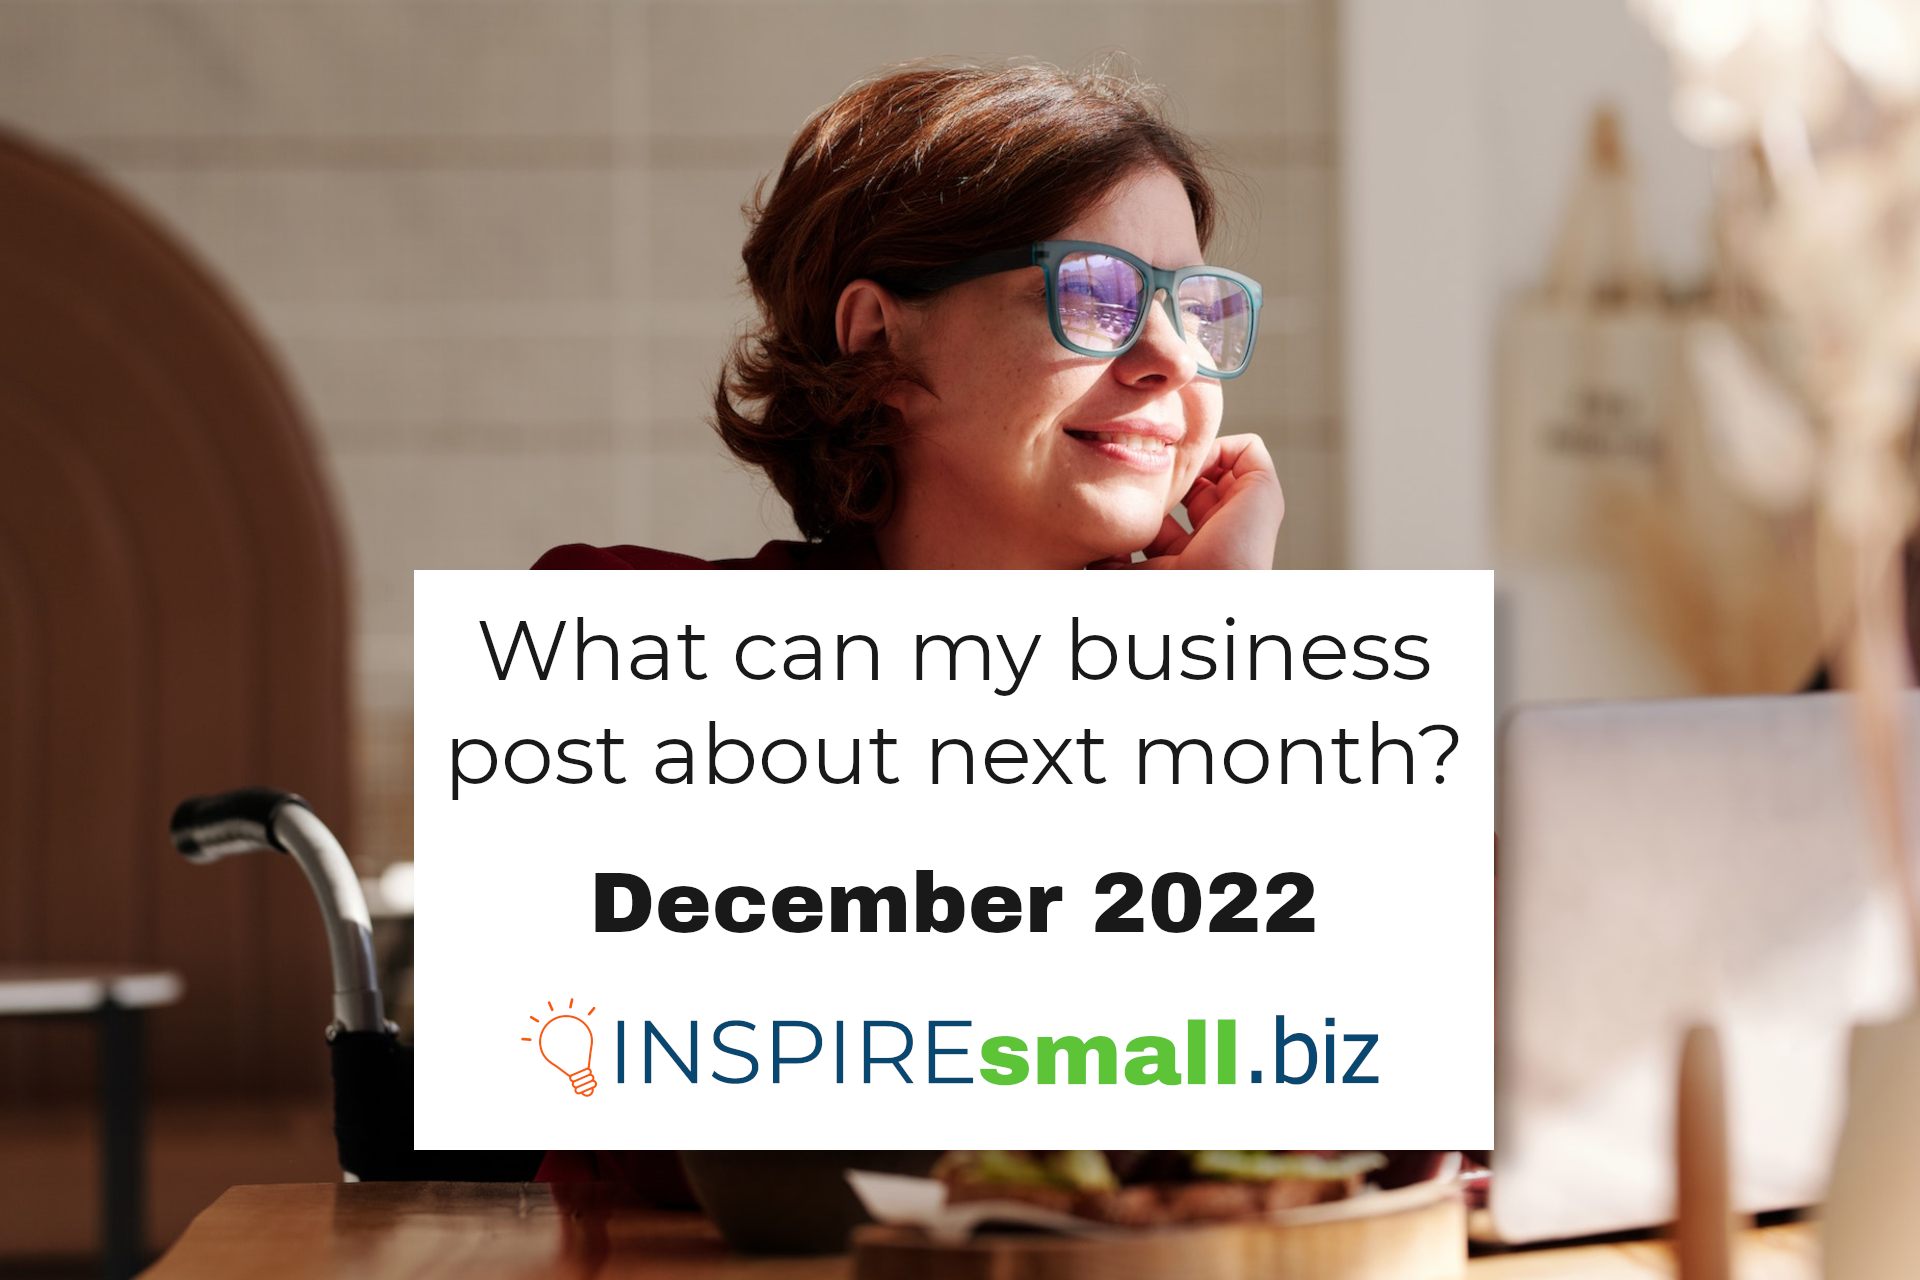 What can my business post about next month? December 2022